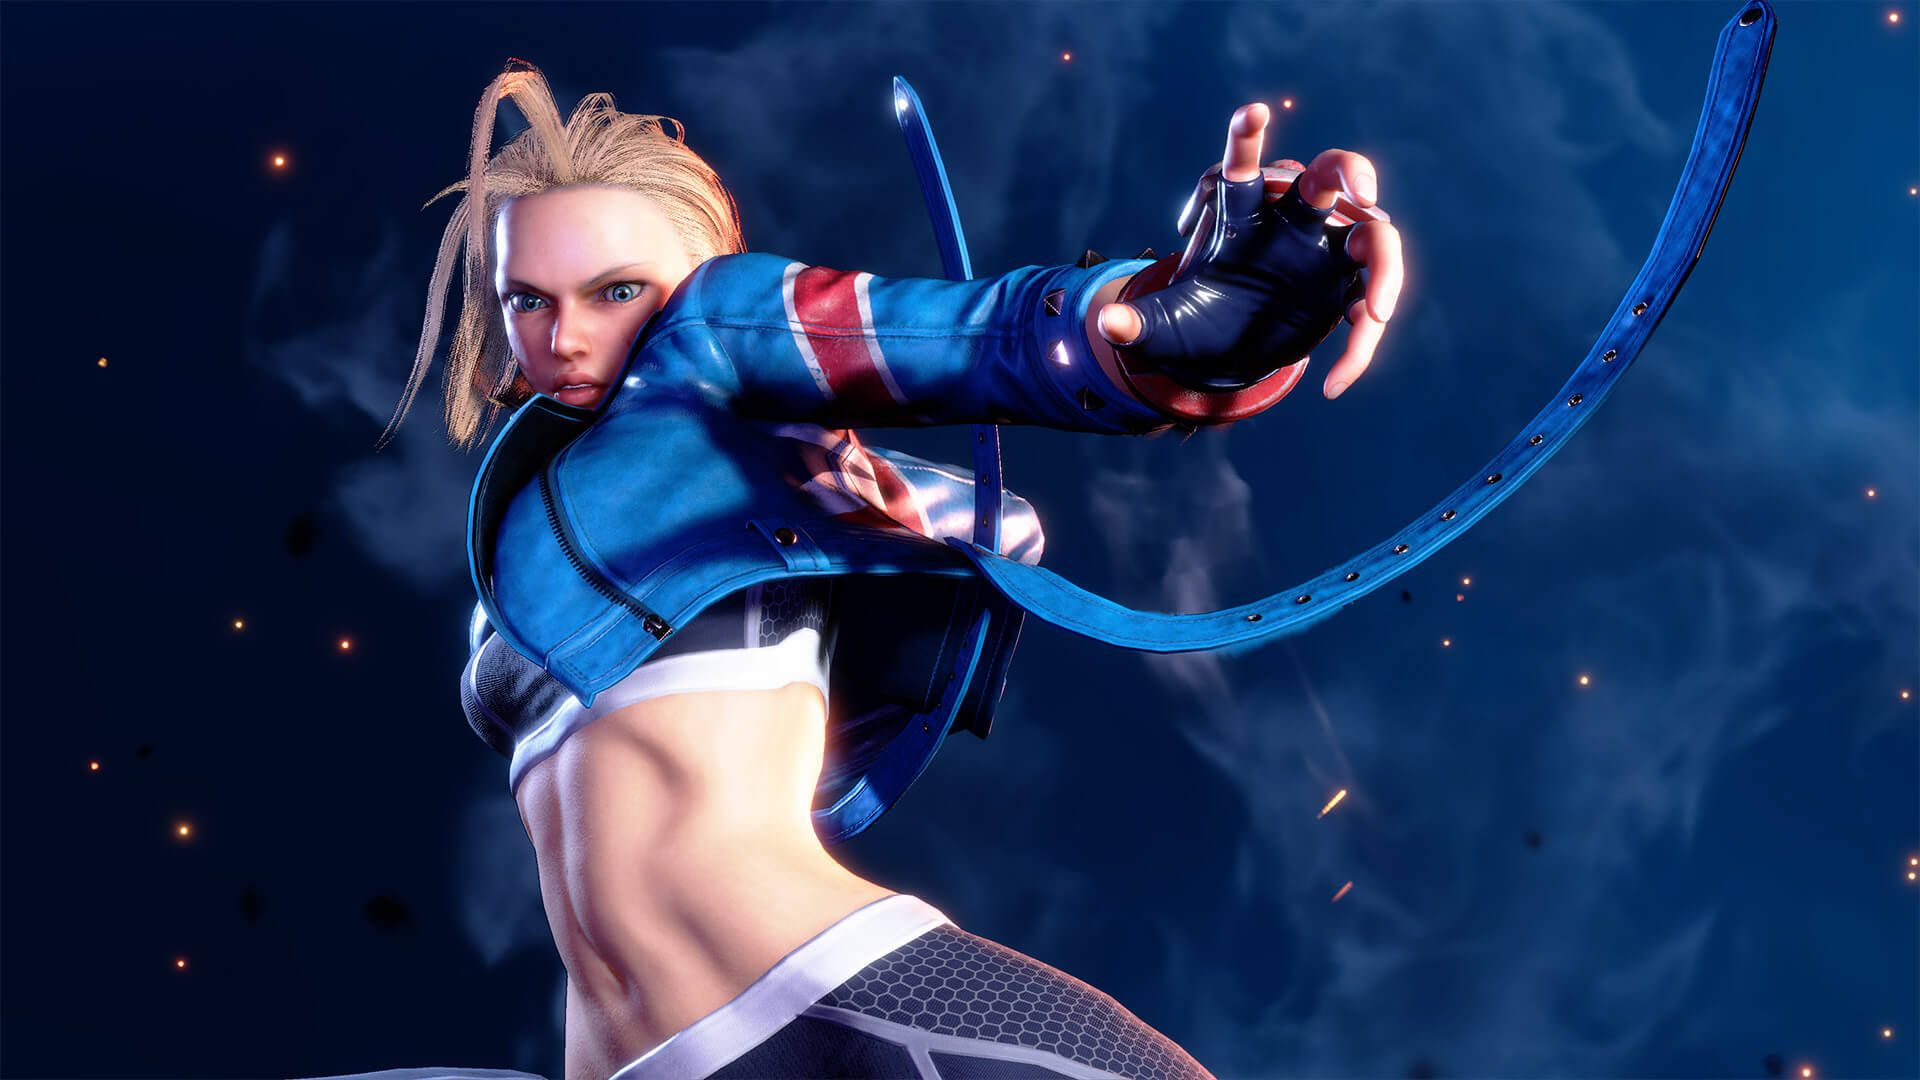 Street Writer: The Word Warrior: Cammy gets an entirely new look